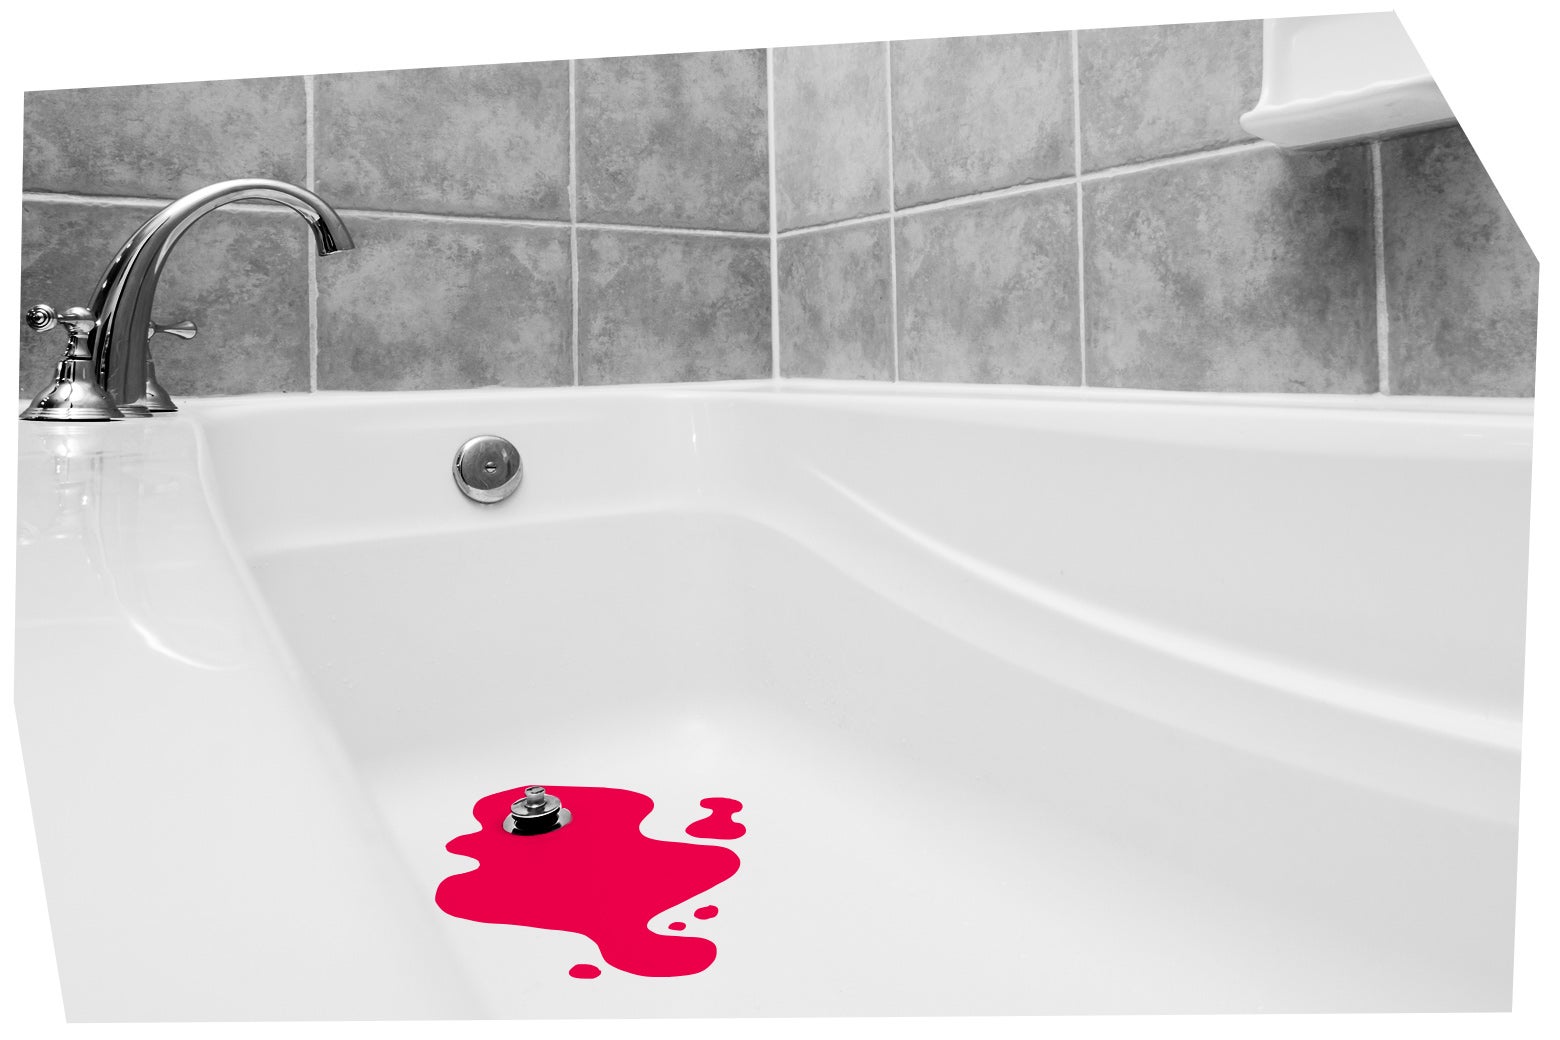 Photo of a bathtub with an illustrated puddle around the drain.